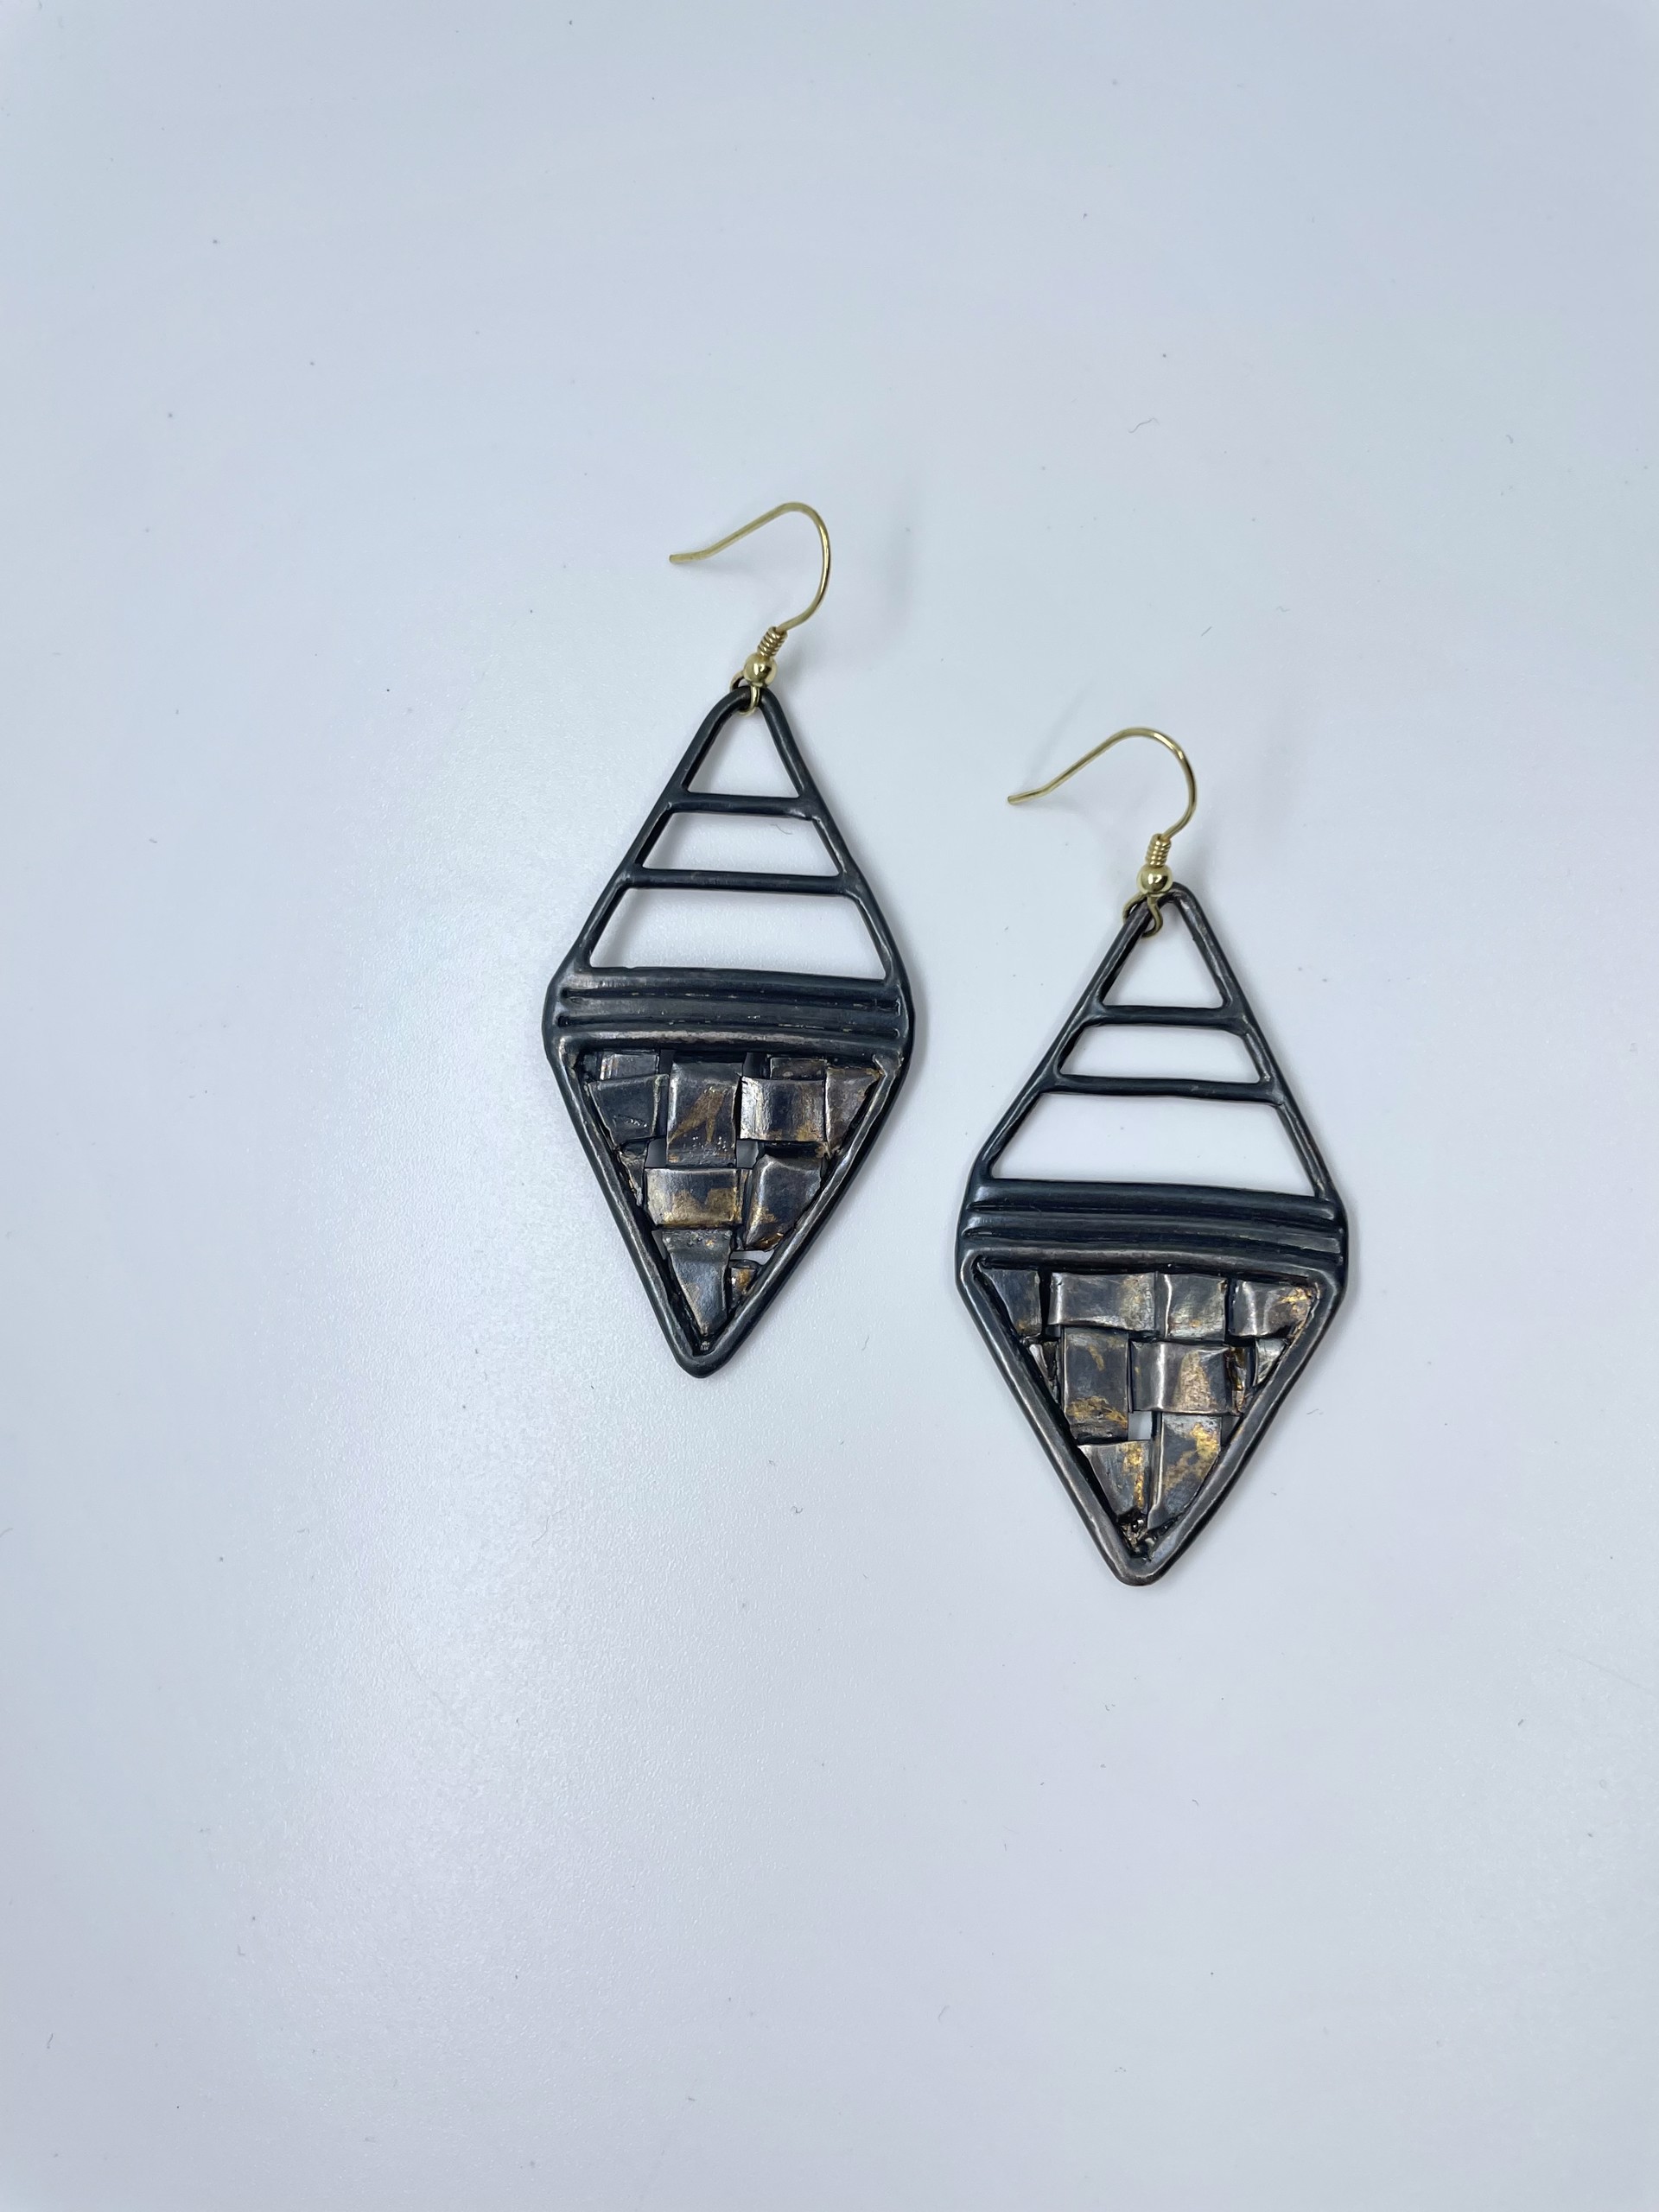 Diamond Shaped Earrings with Woven Details by Beth Benowich